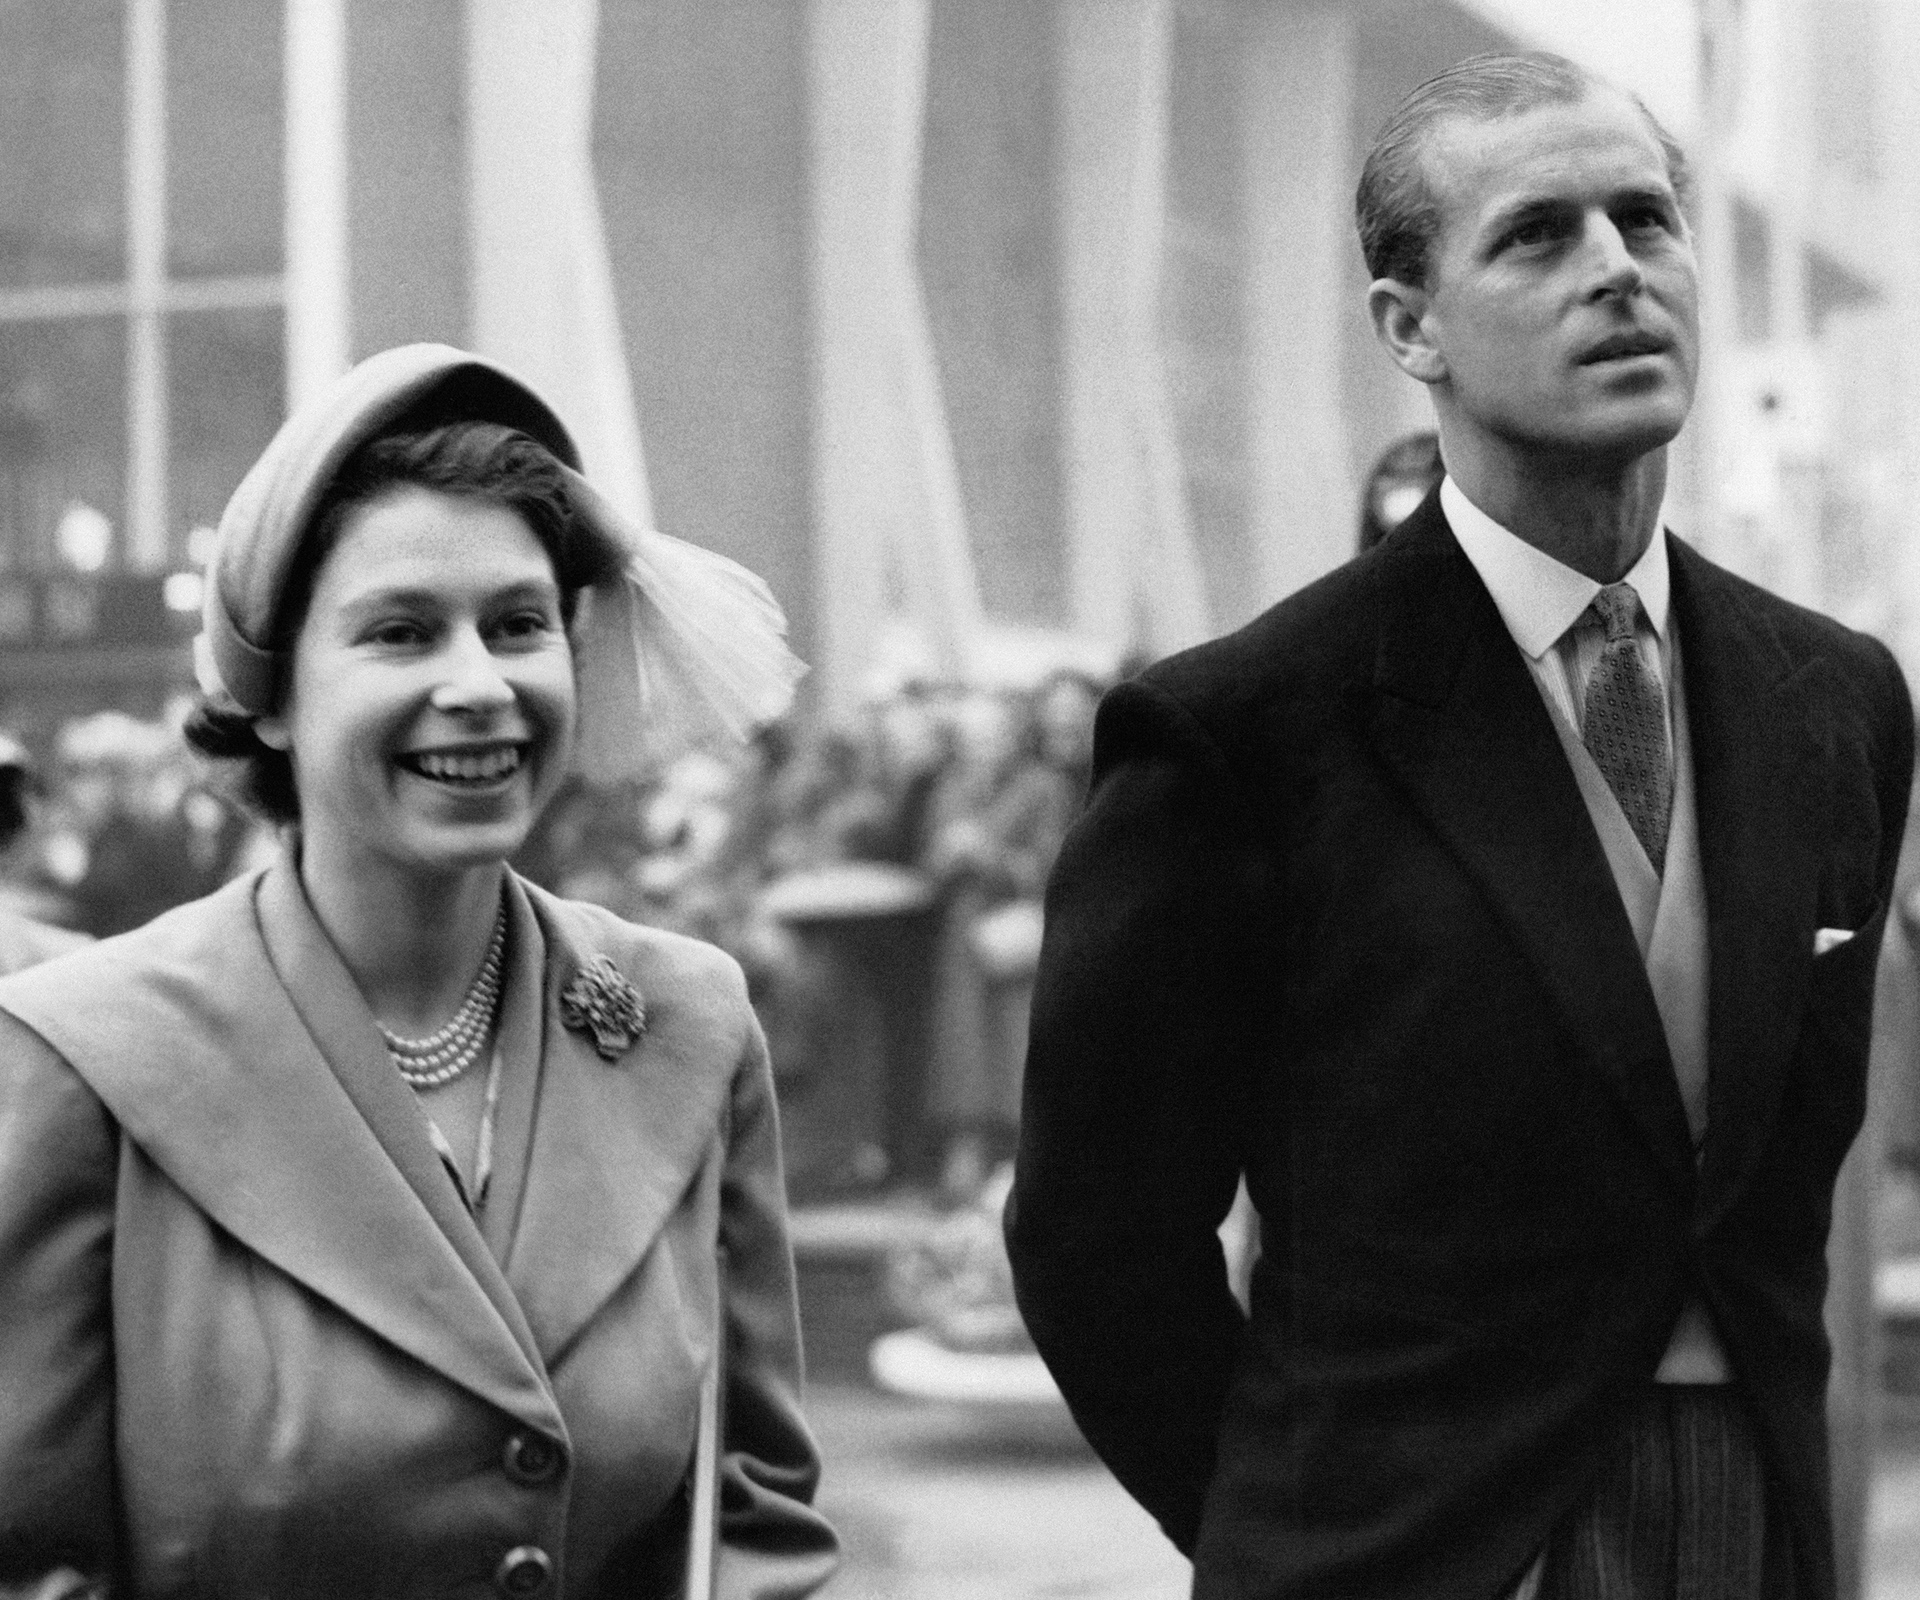 Meet the actors to play the Queen and Prince Philip in upcoming Netflix series